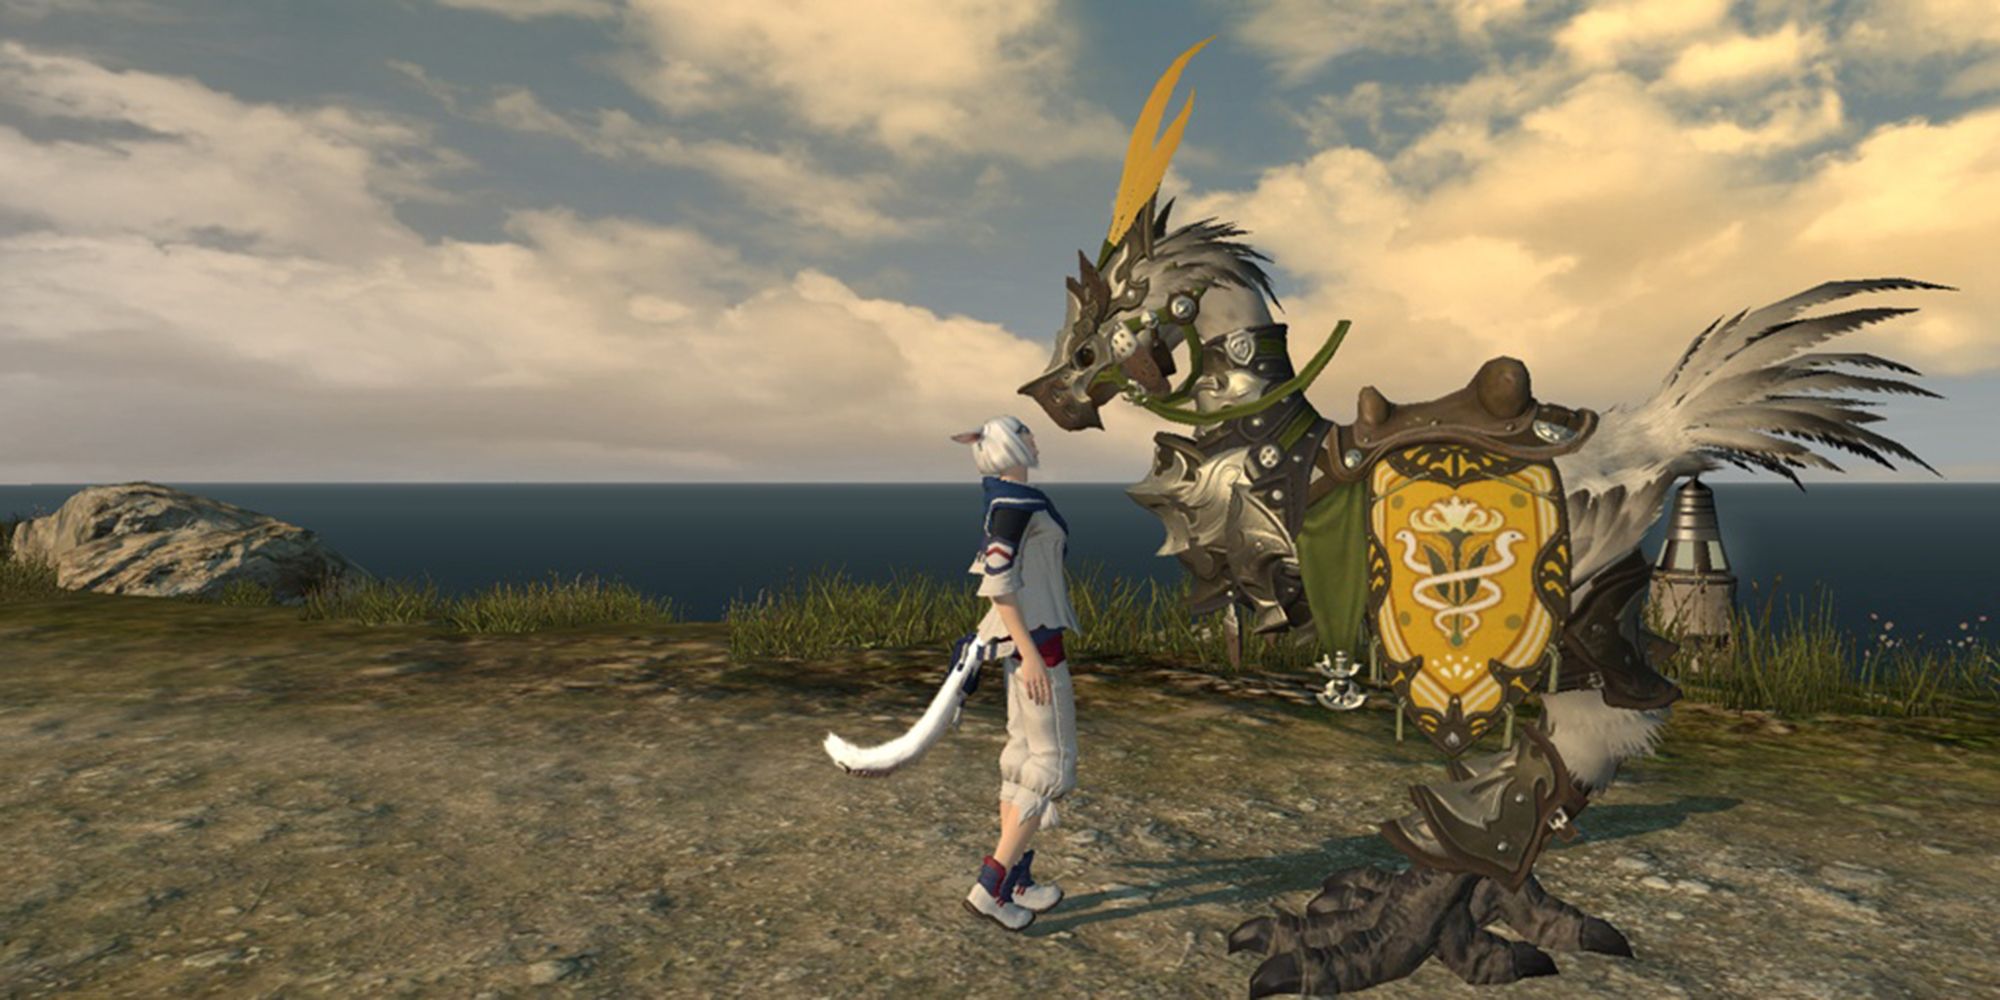 player next to chocobo equipped with gridanian crested barding